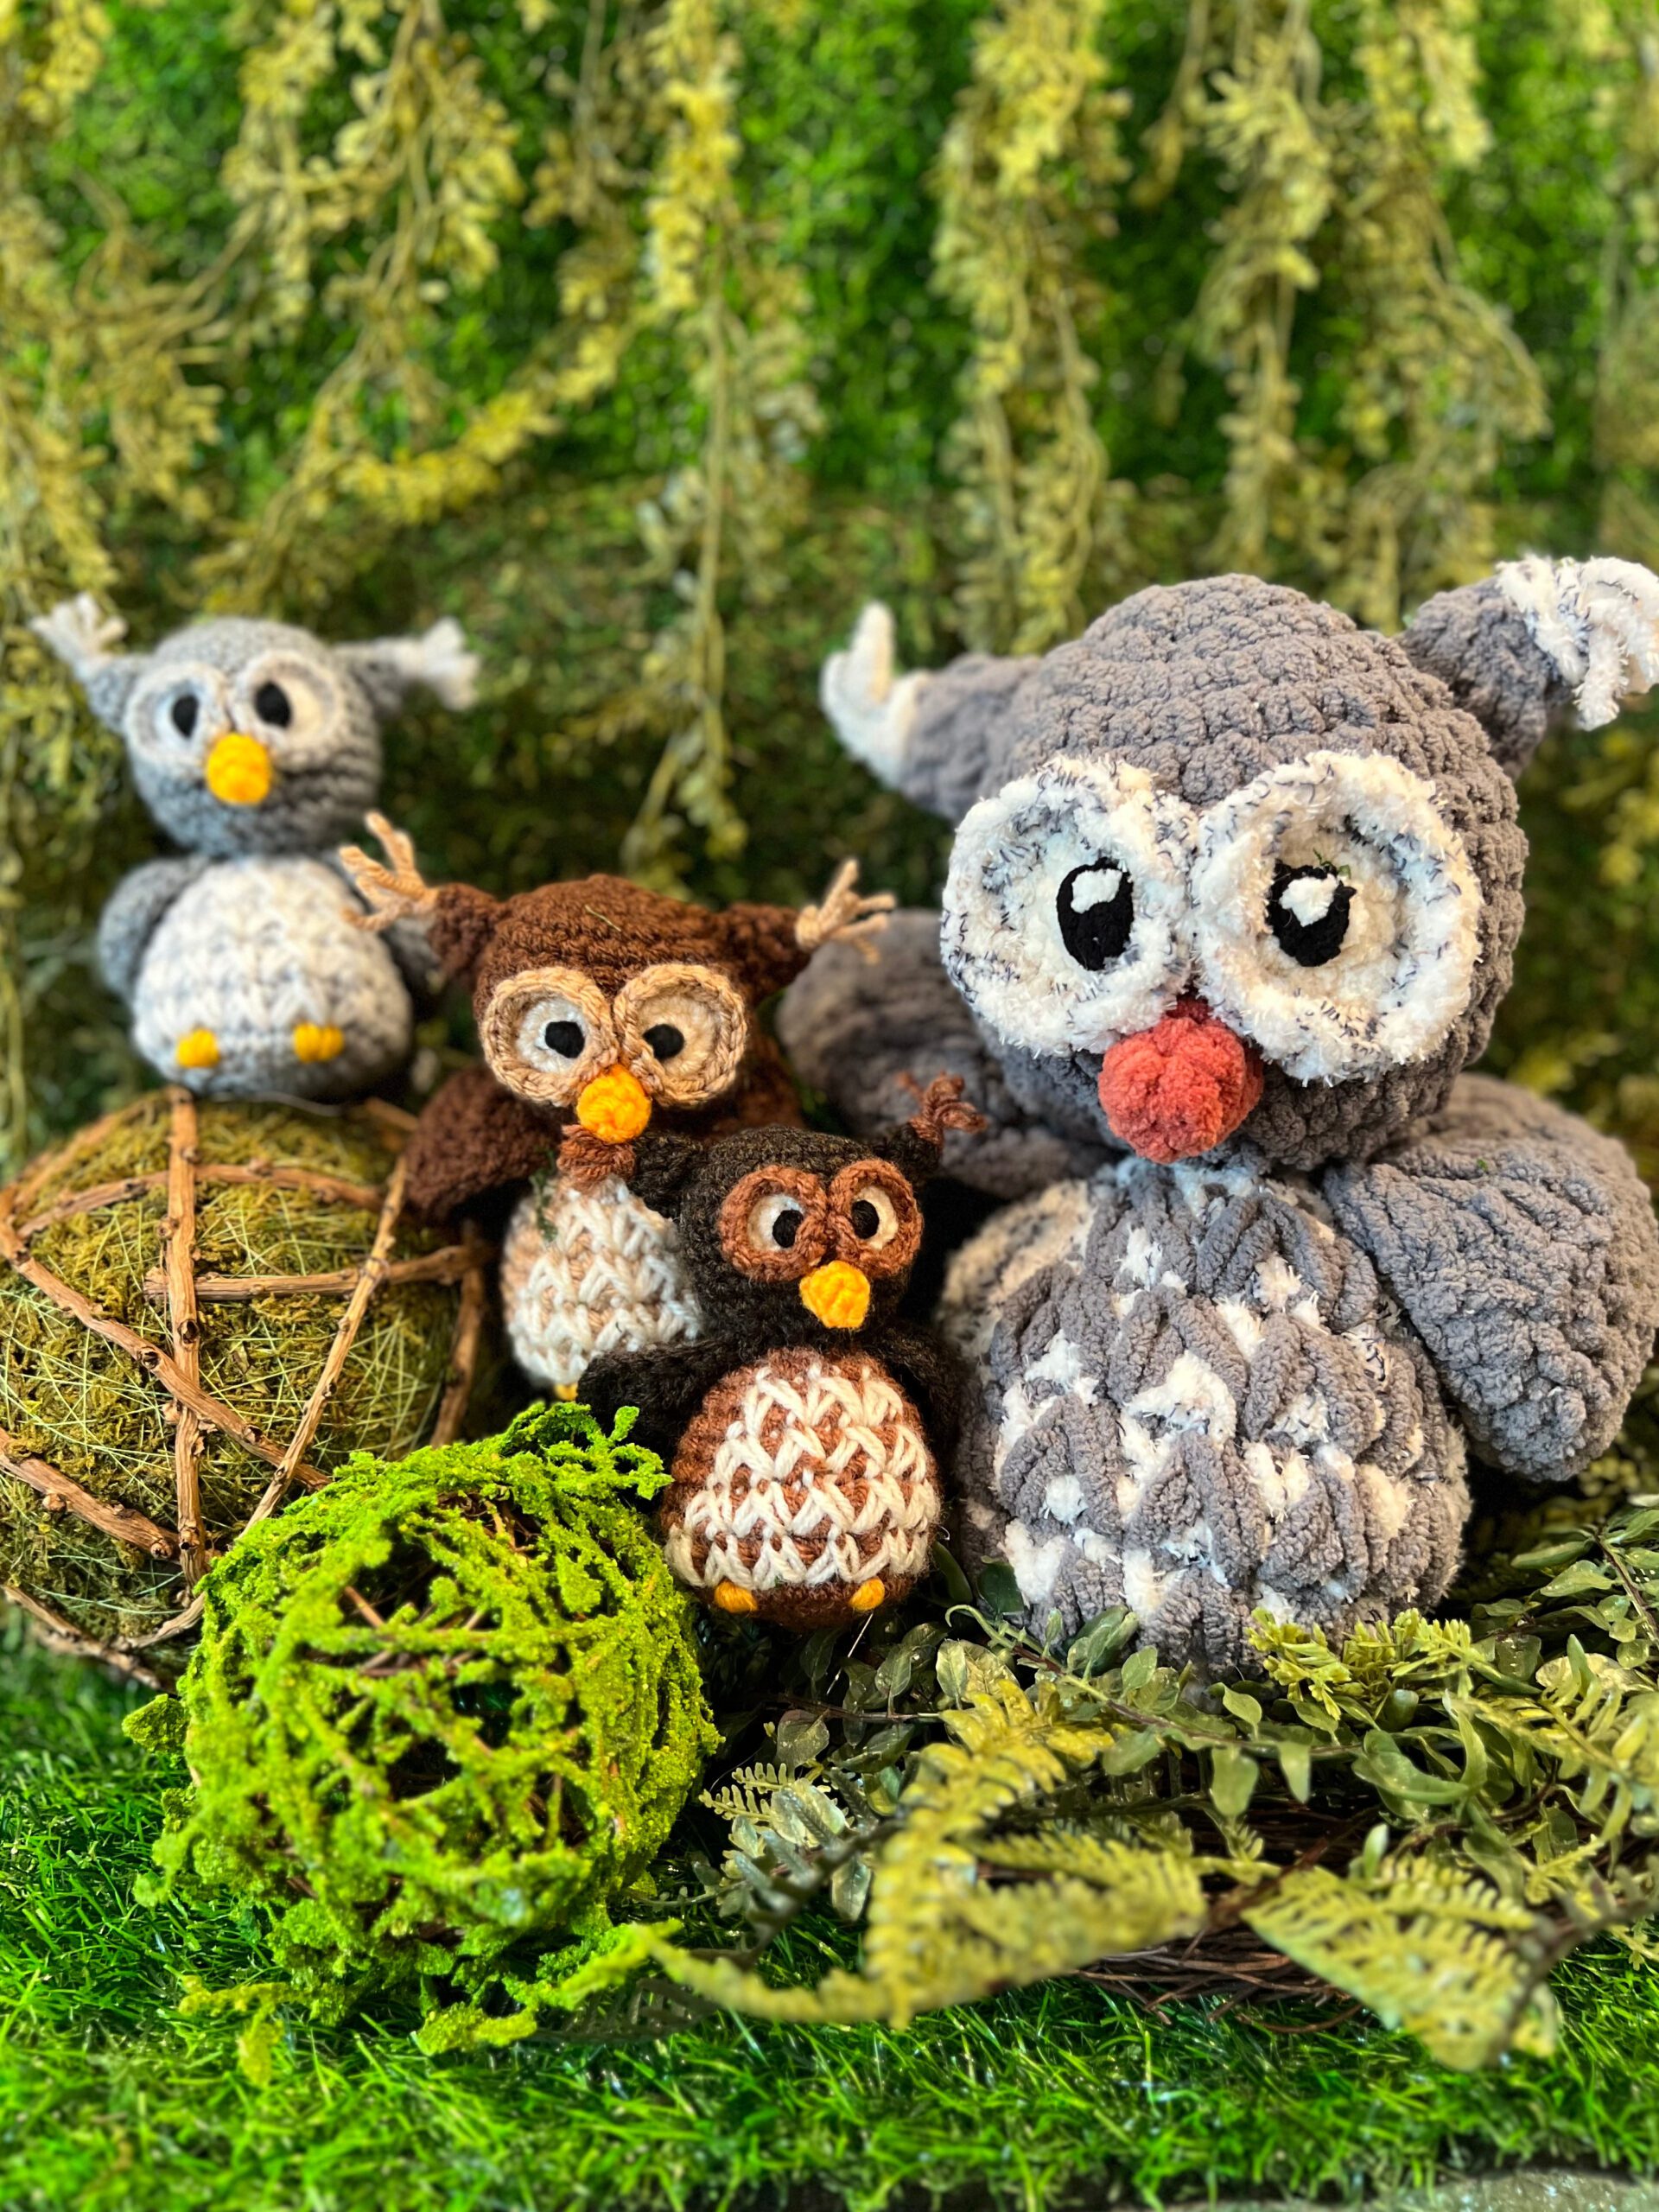 Marly Bird Image of 4 owl toys ranging in size from small to large in gray and brown colorways